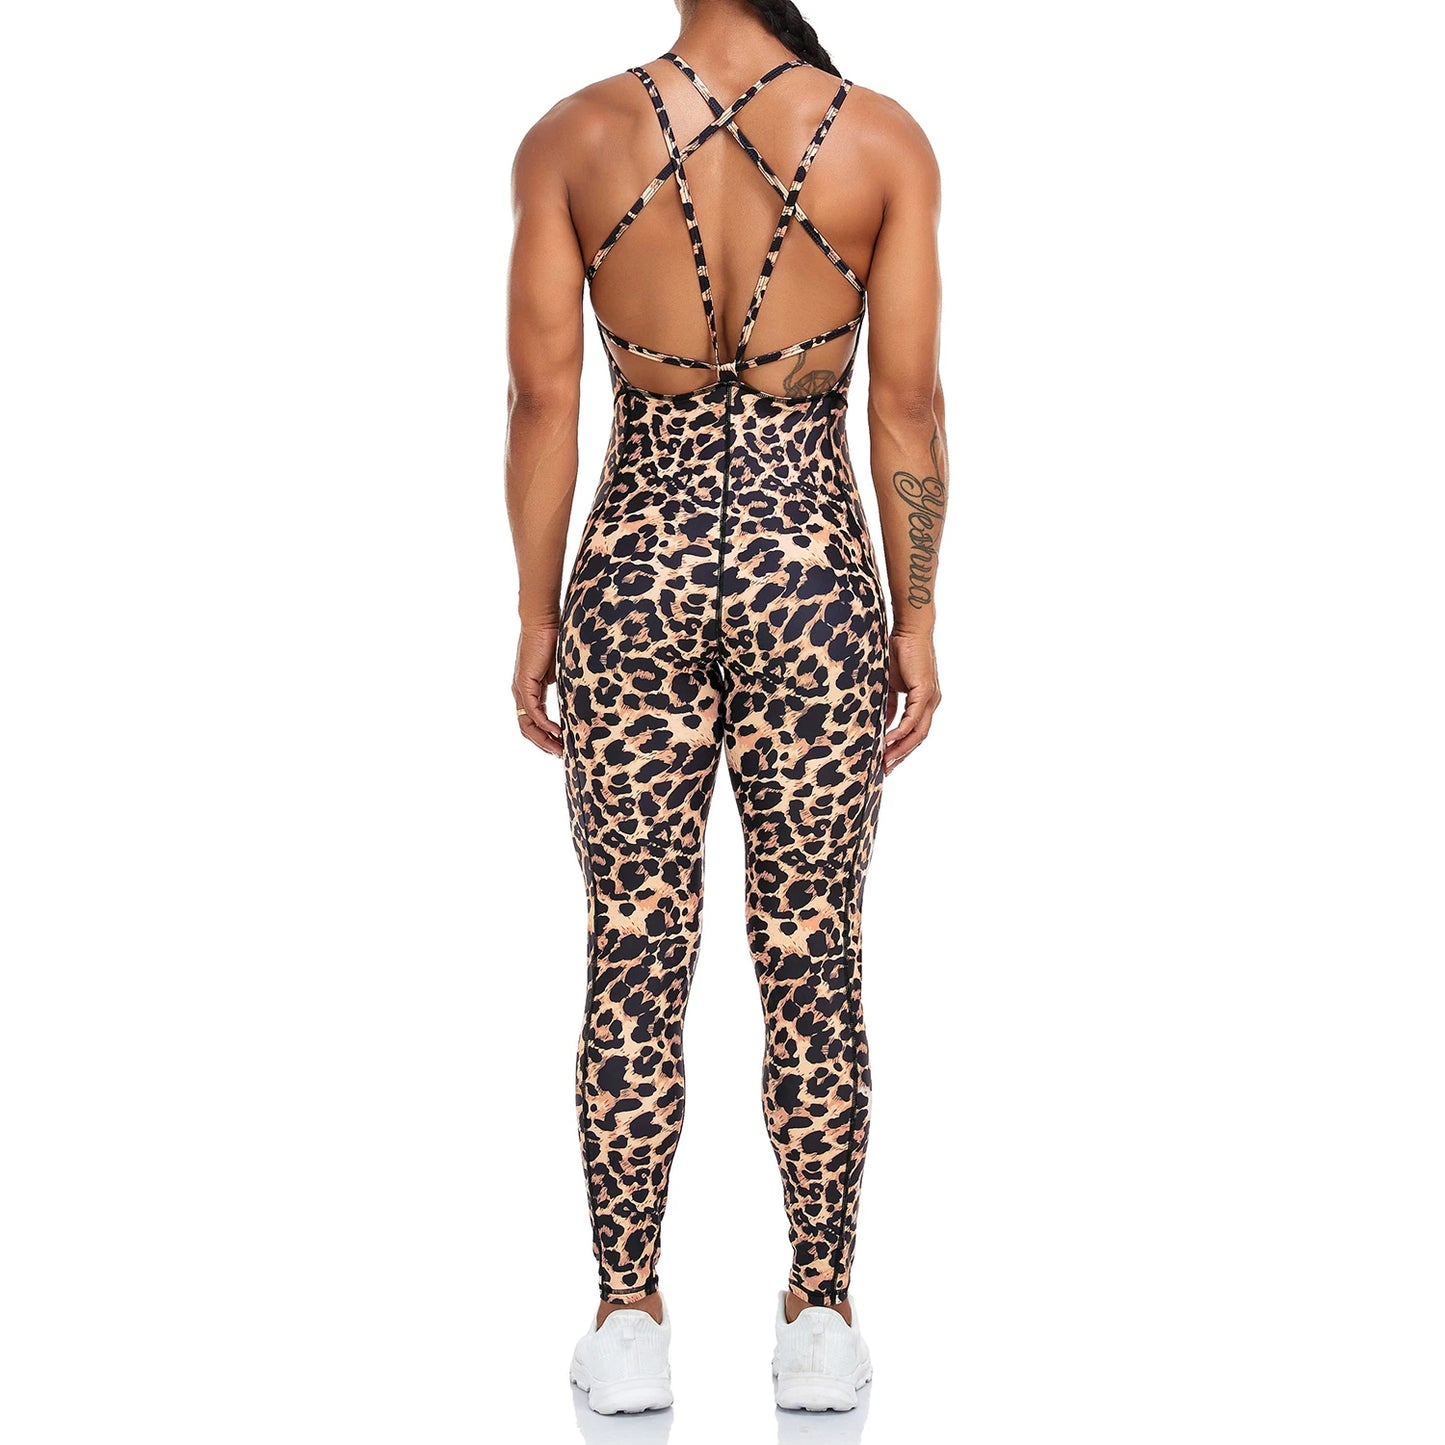 Big Lift Fitness Leopard Print Jumpsuit with Crossover Straps